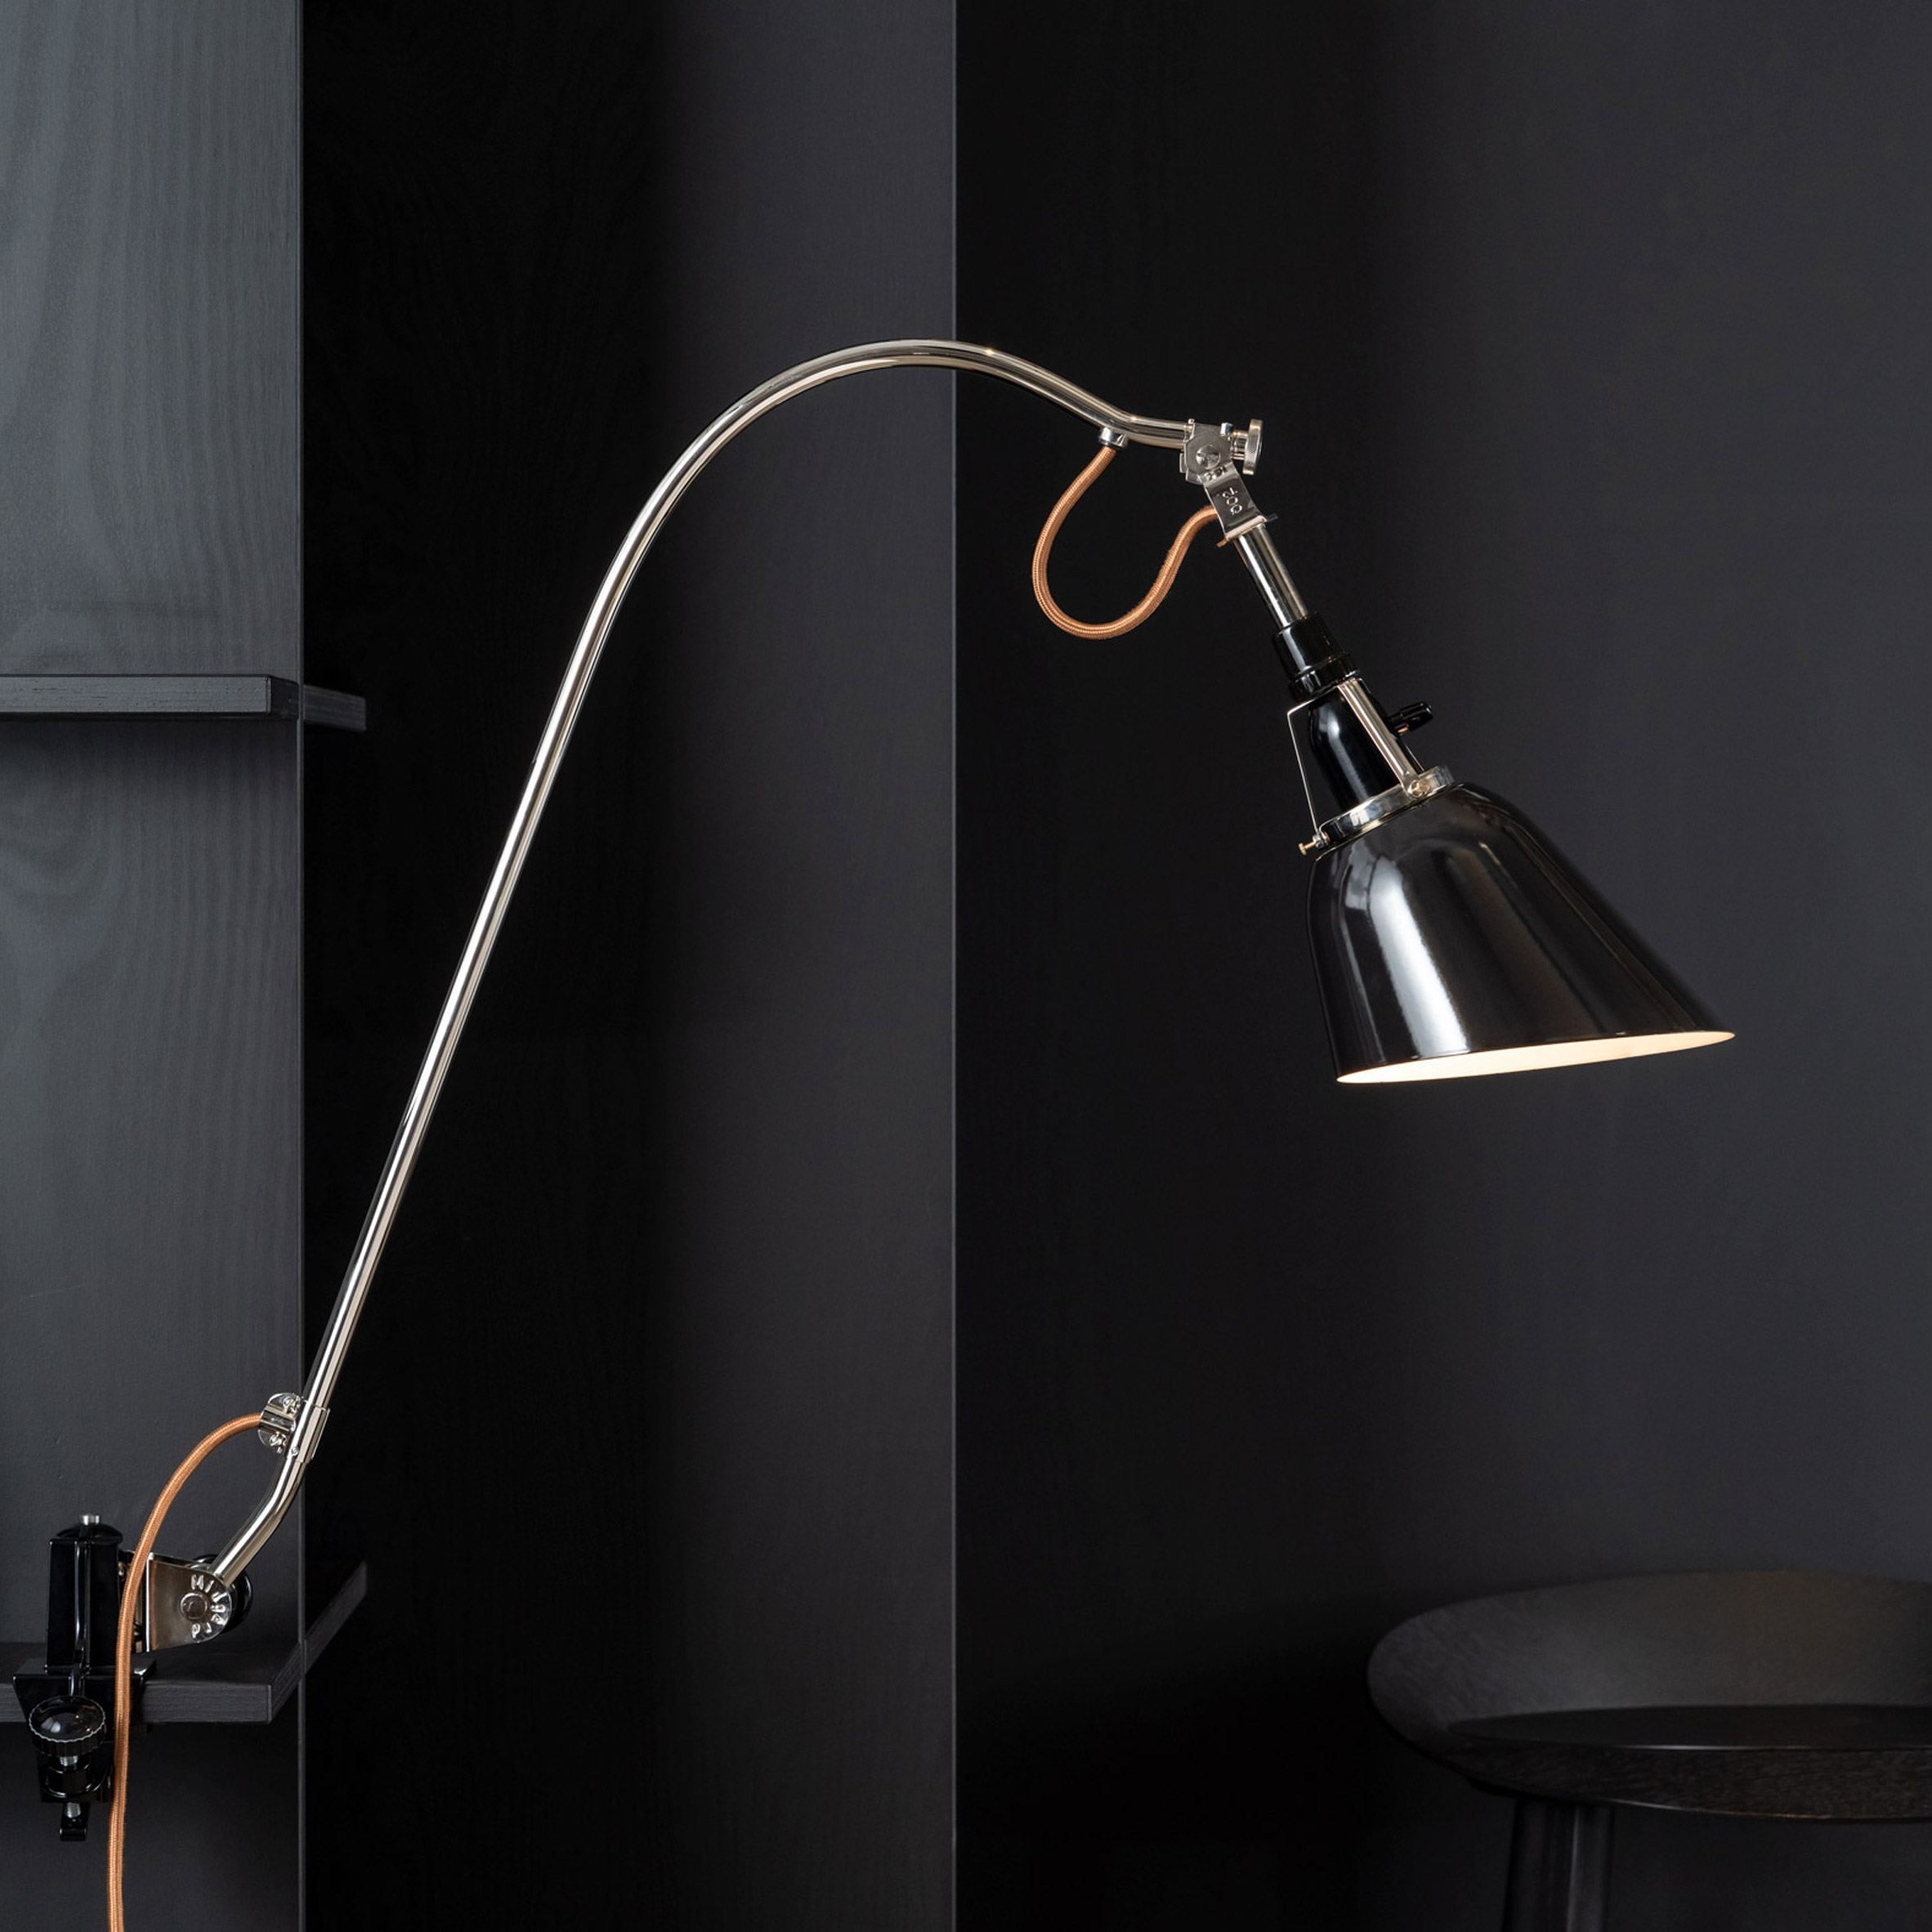 Adjustable lamp by Walter Gropius and the Bauhaus school revived